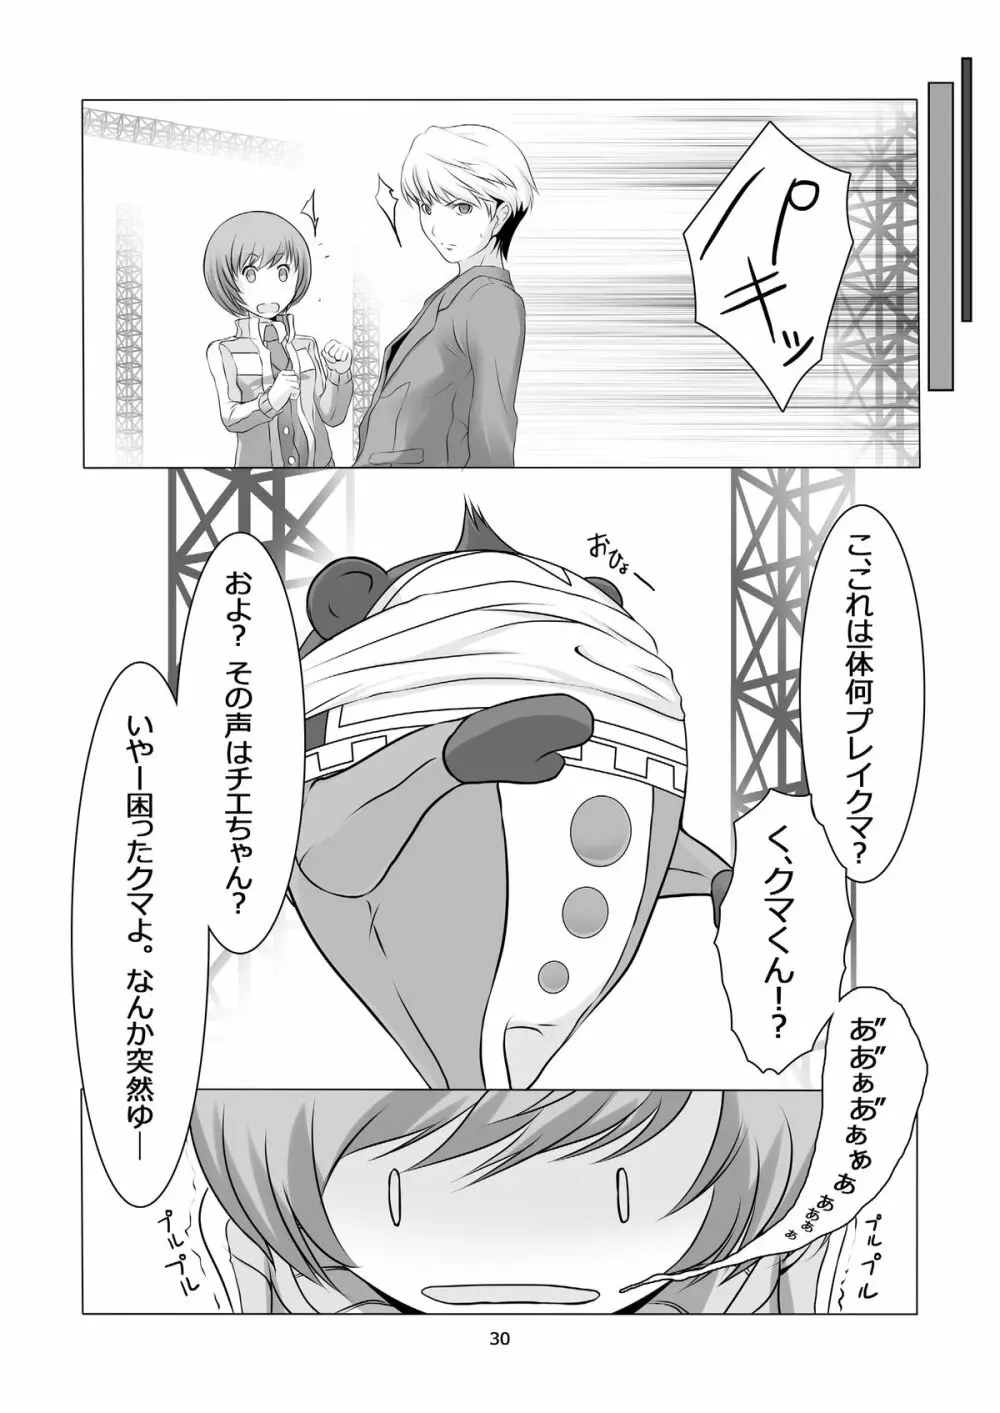 Persona 4: The Doujin #2 Page.32